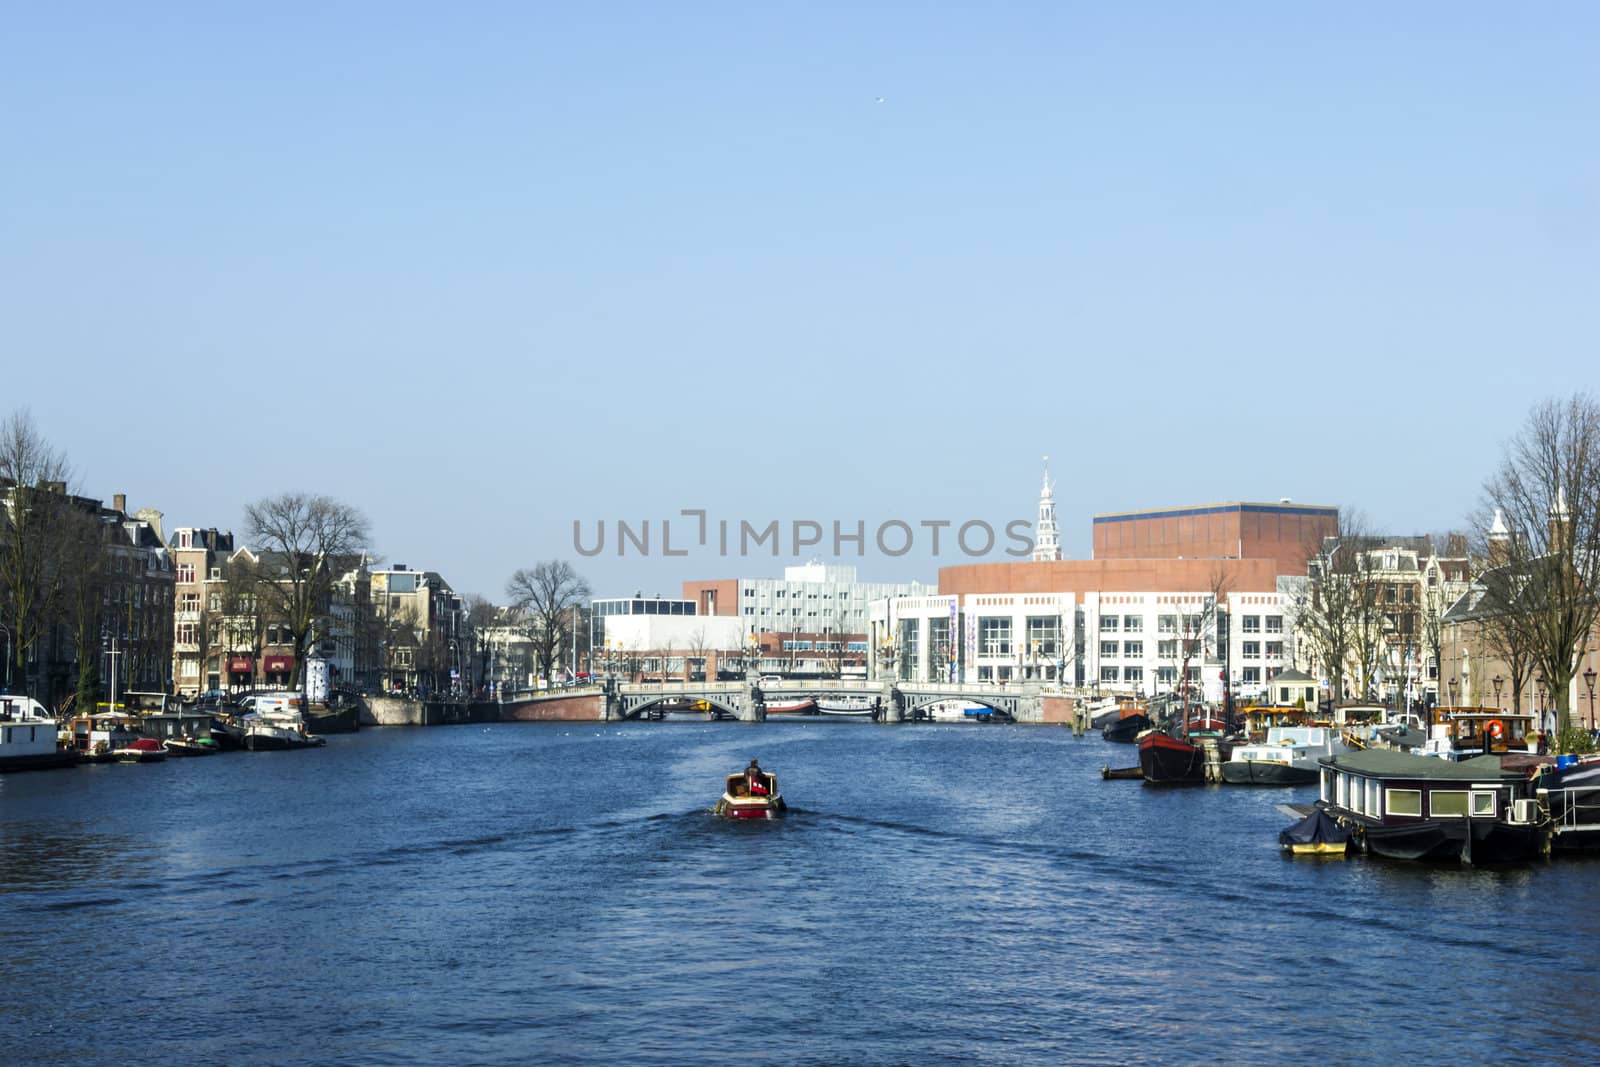 Amsterdam city in the Netherlans, boat in the river Amstel